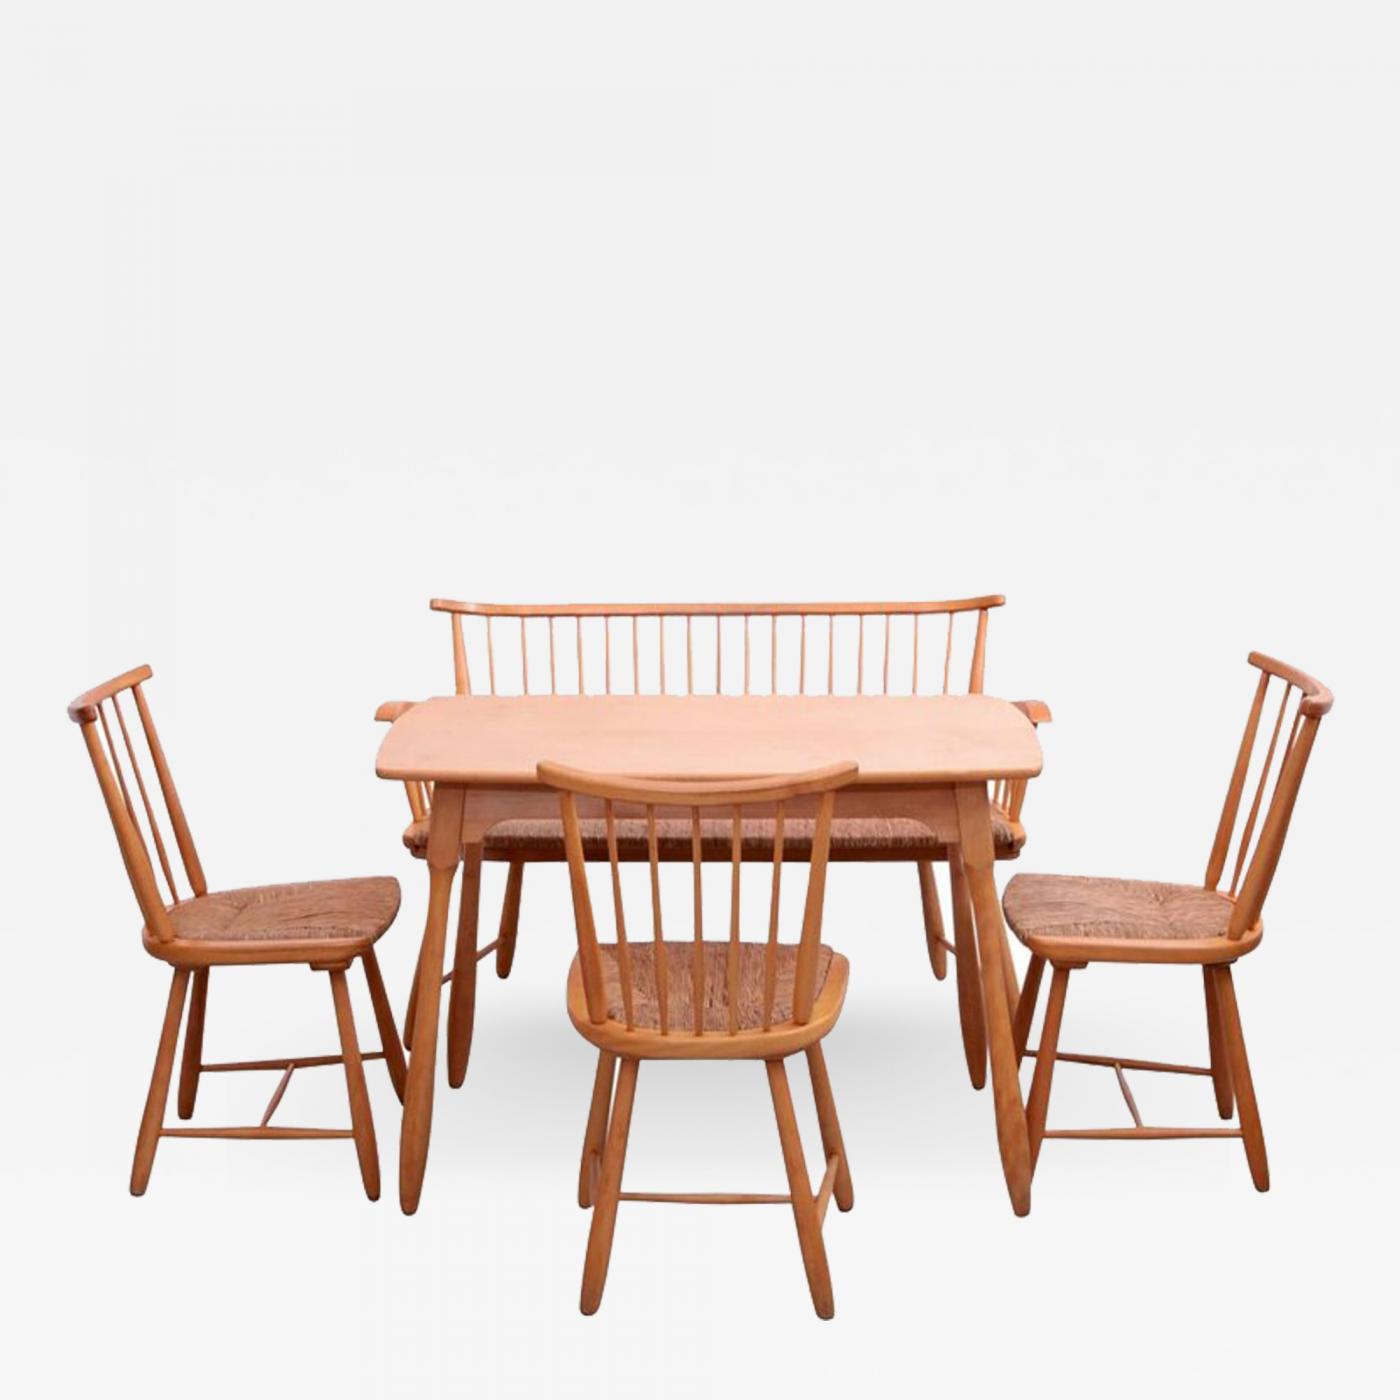 Arno Lambrecht Arno Lambrecht Dining Set Of Table Three Chairs And A Bench For Wk Mobel